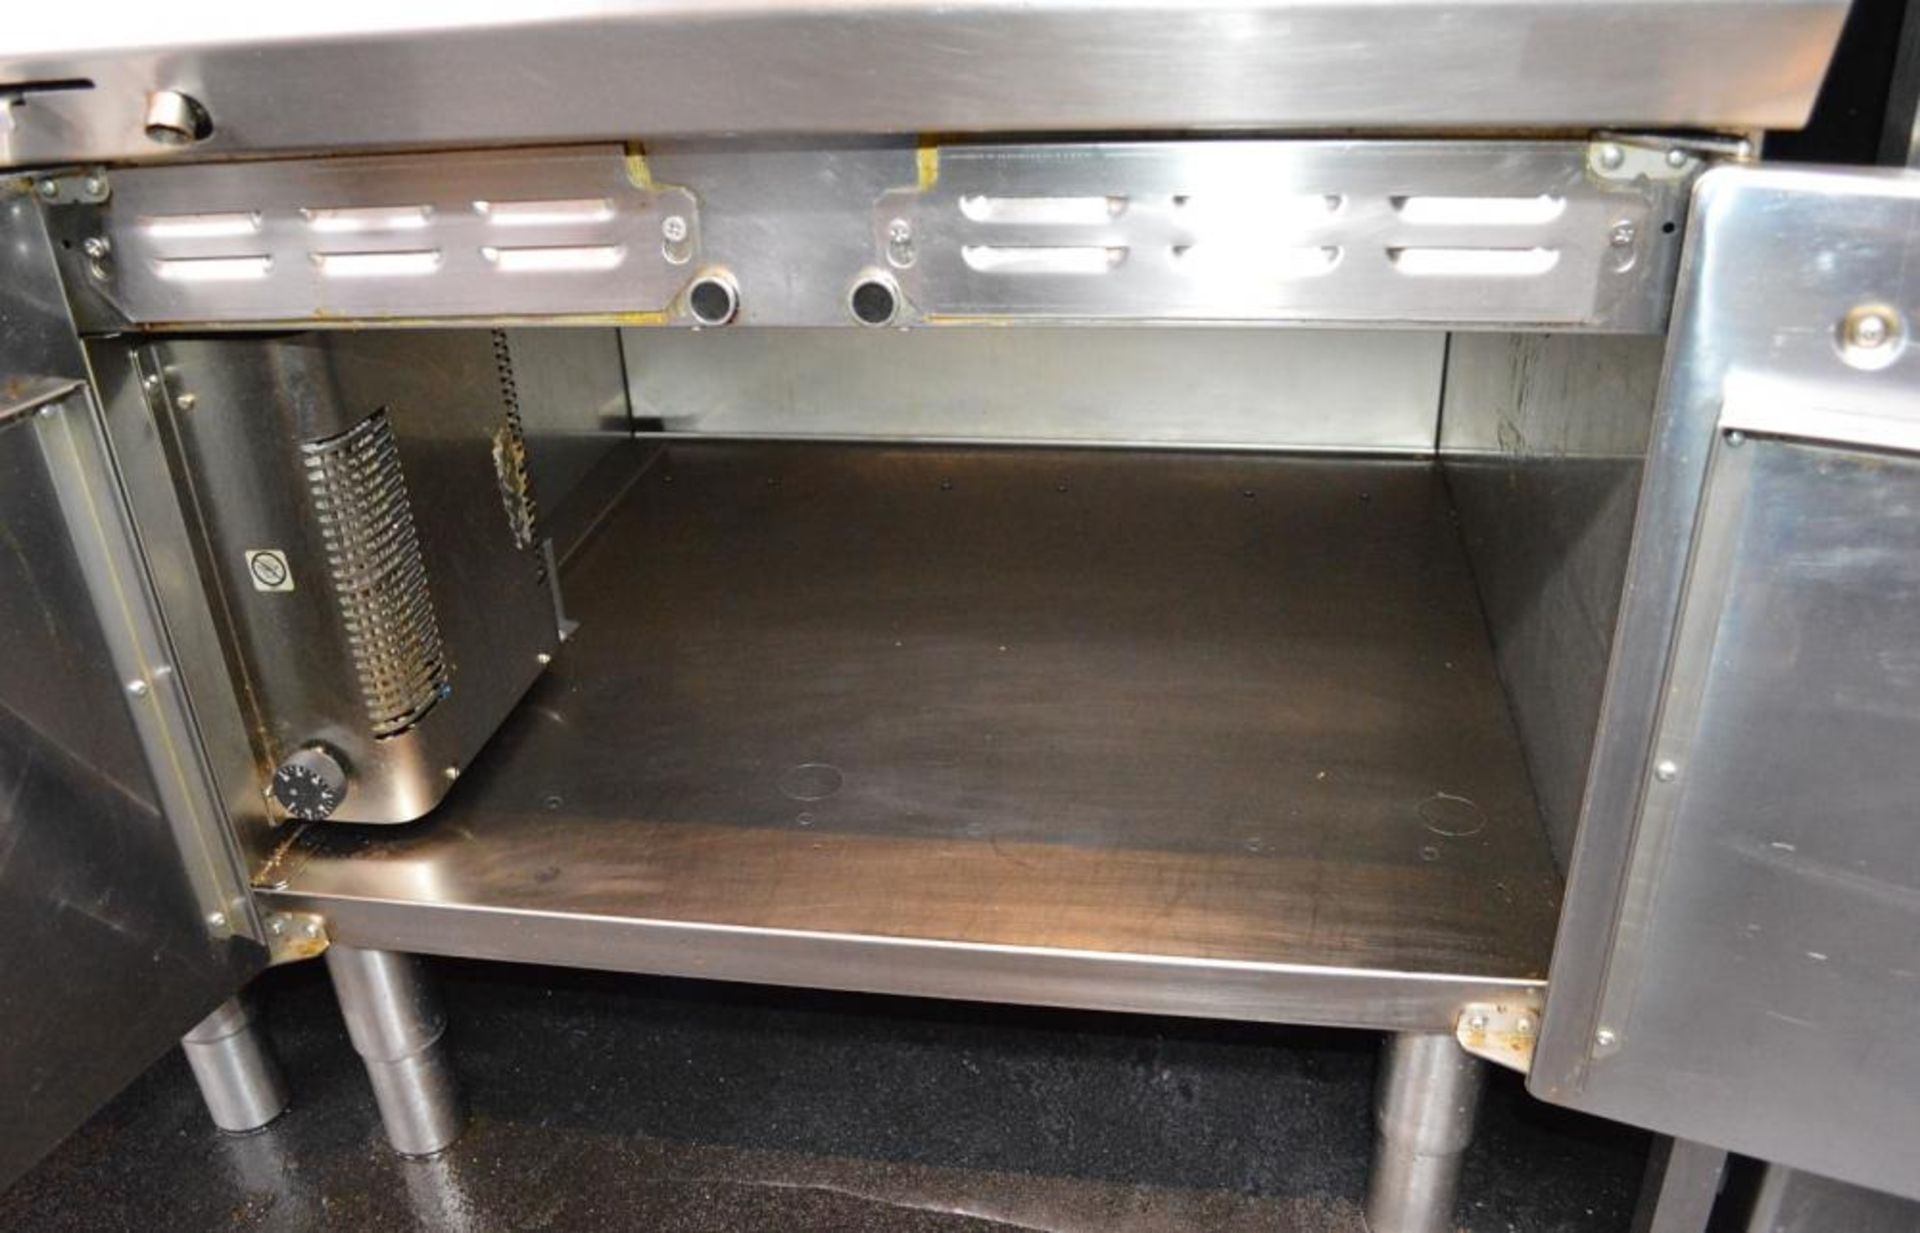 1 x Angelo Po BAINE MARIE Commercial Kitchen Equipment With Modular Design and Stainless Steel - Image 2 of 4